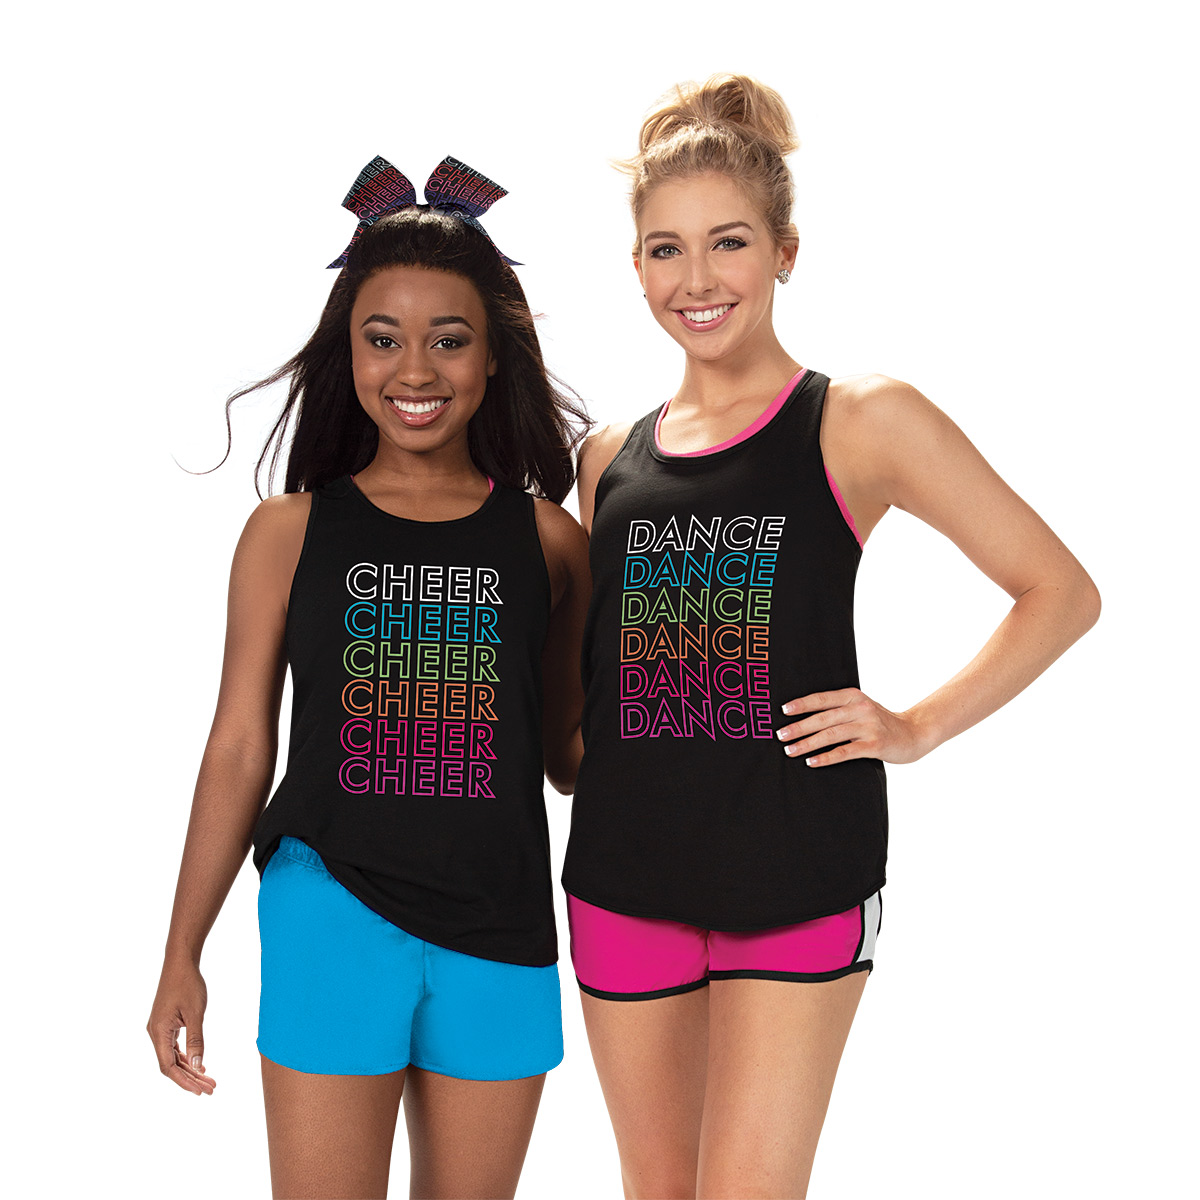 Cheer and Dance Shirts